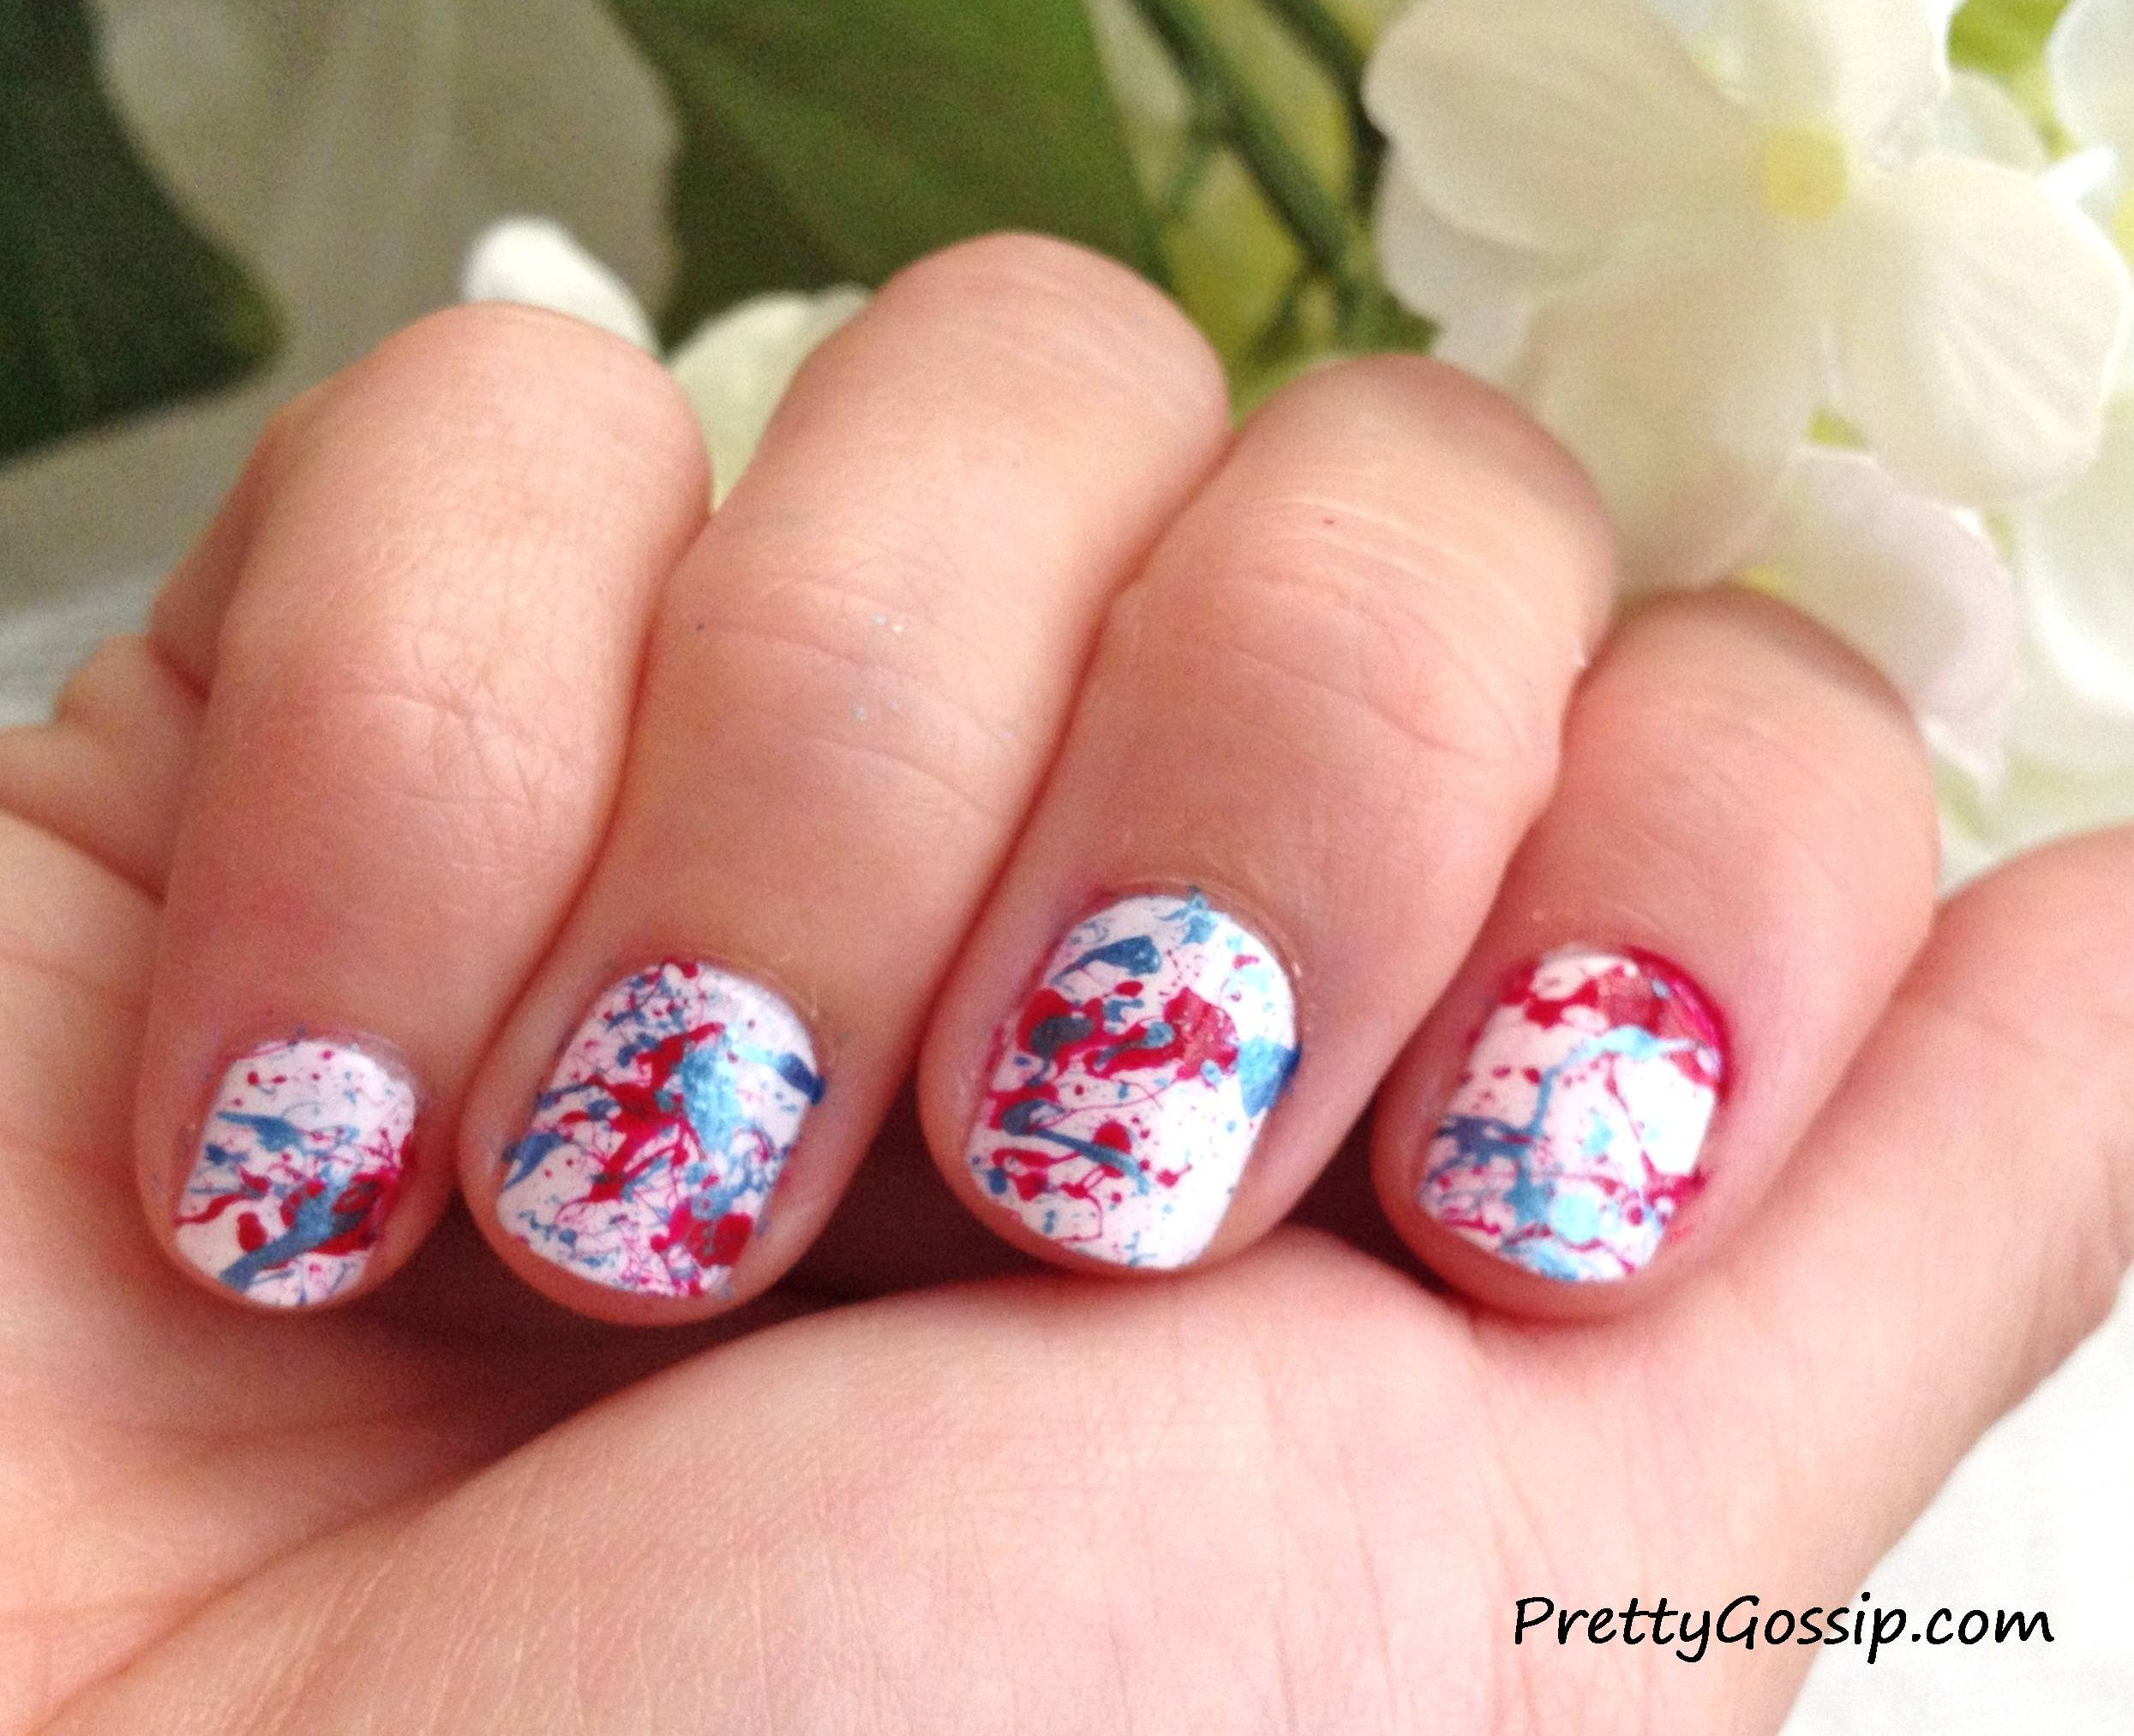 Painted Nail Ideas
 How To Splatter Paint Nails Pretty Gossip